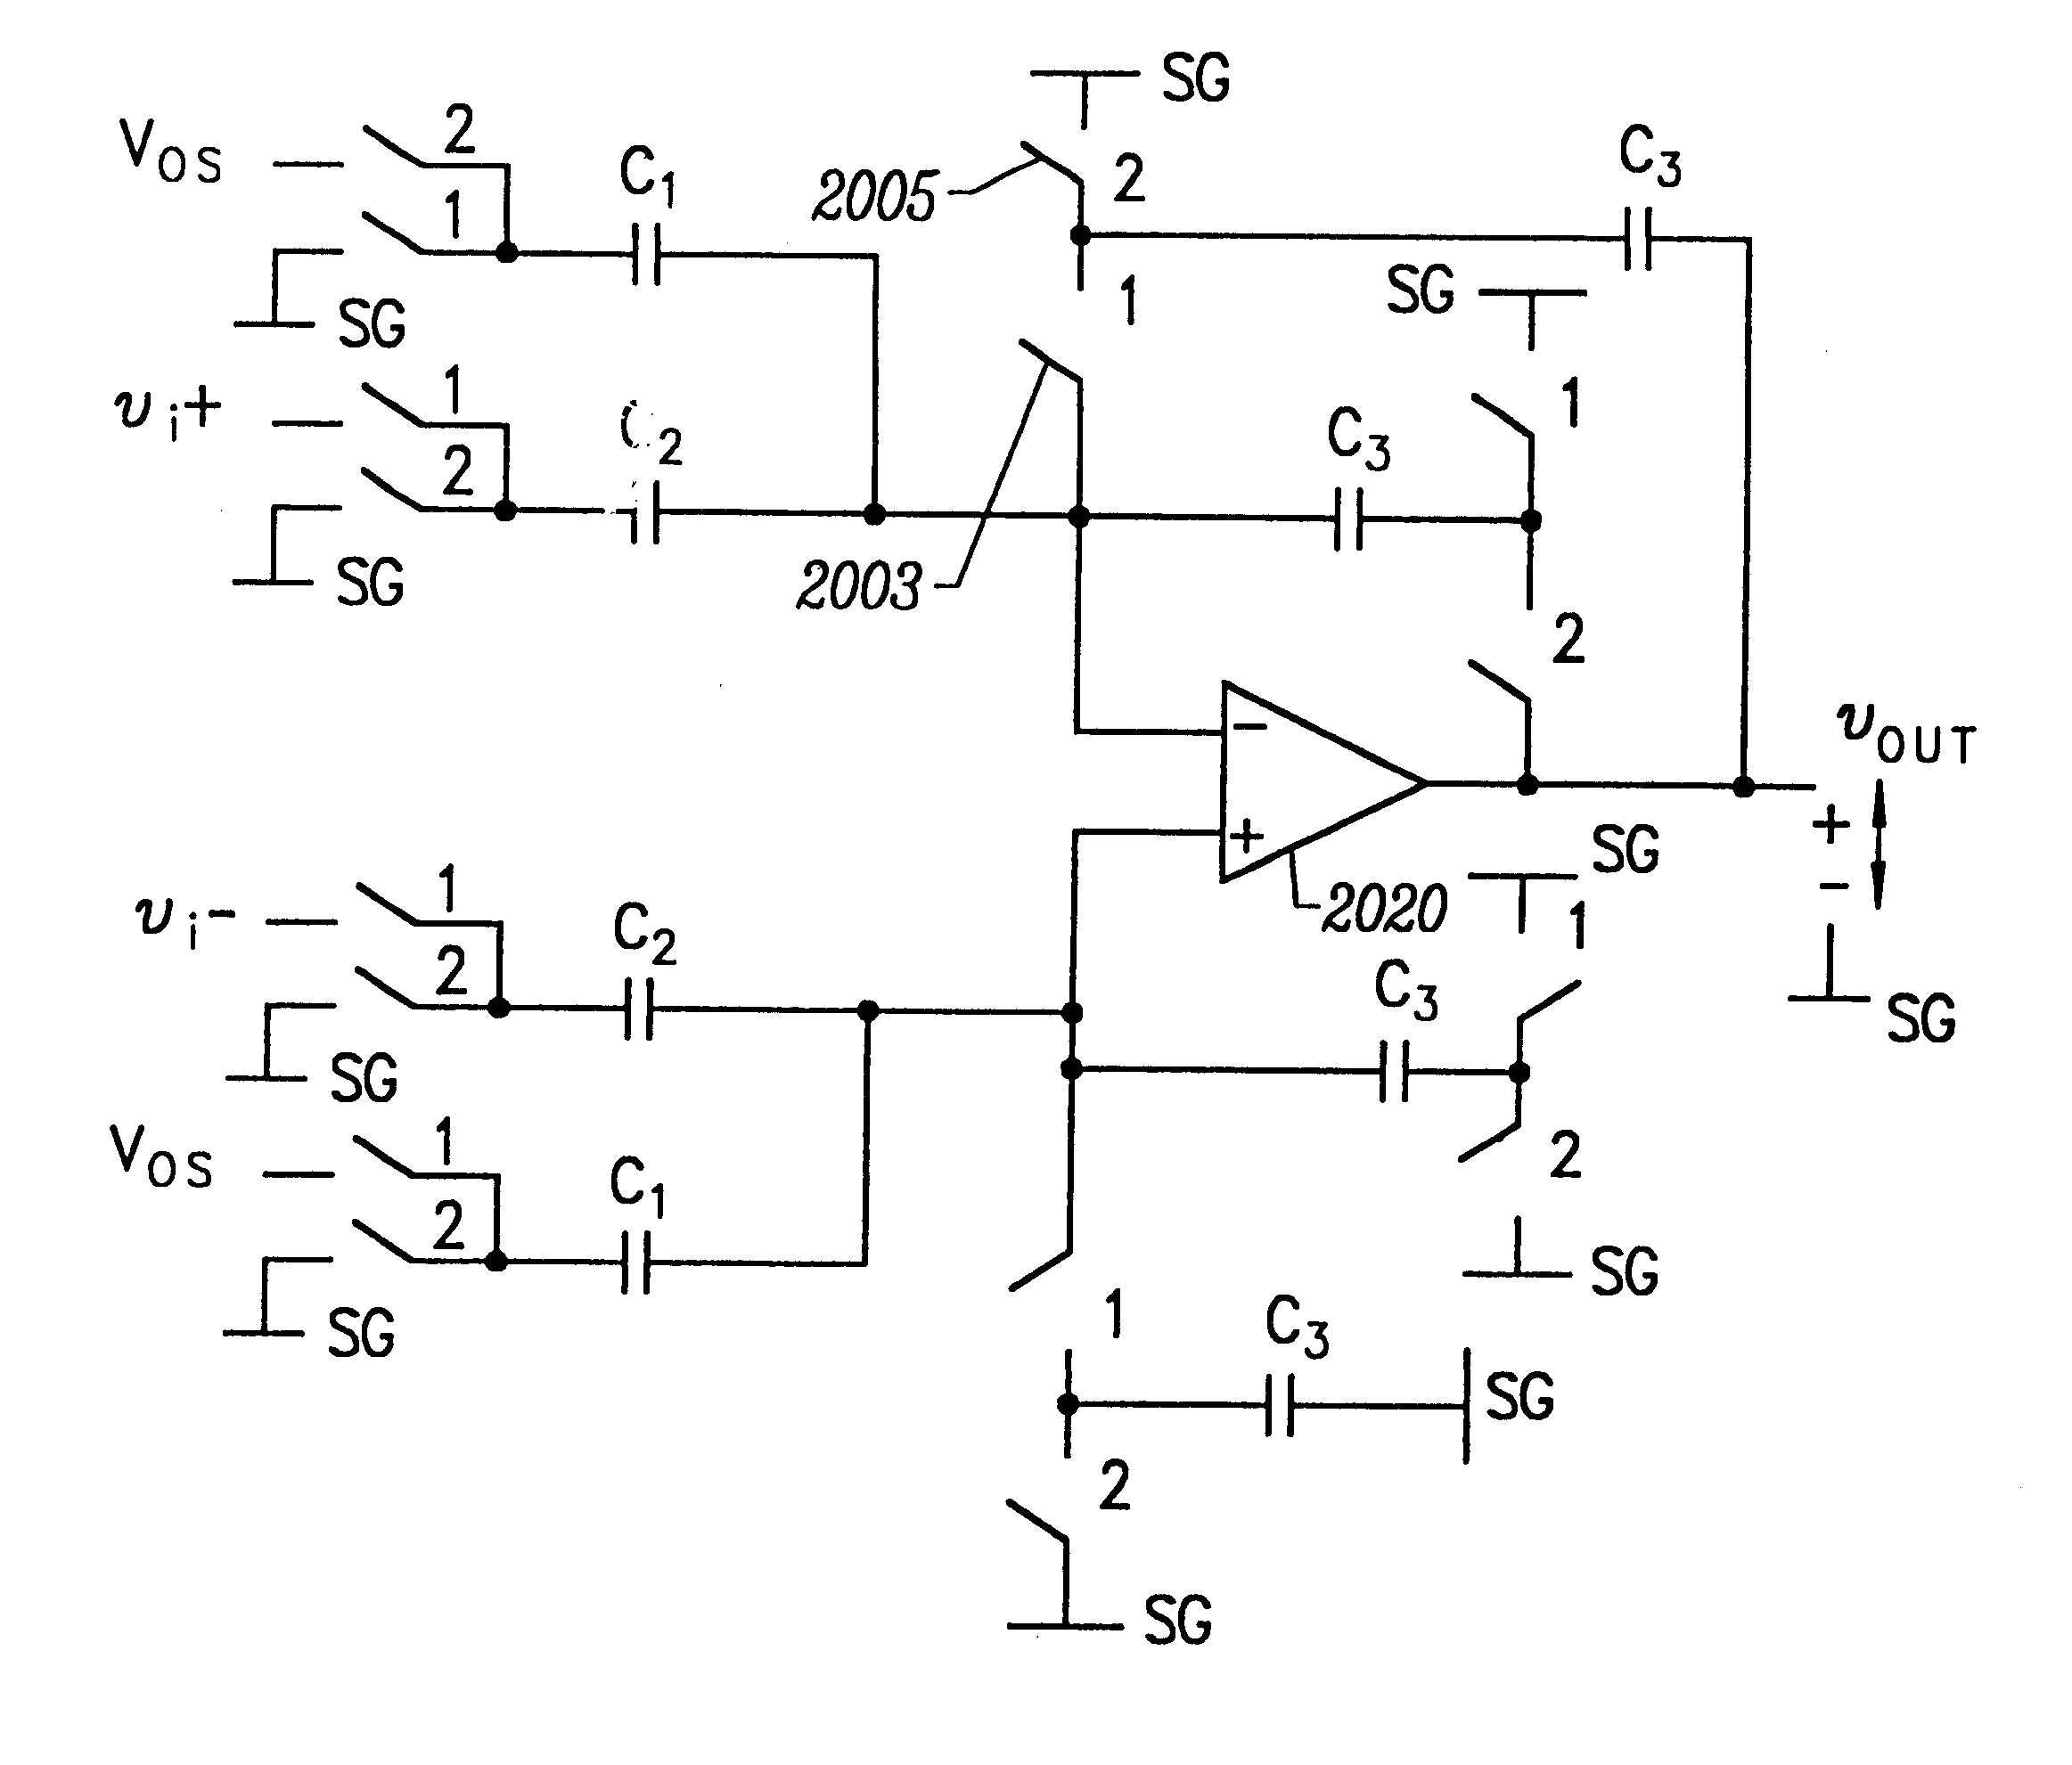 Adjustable level shifter circuits for analog or multilevel memories